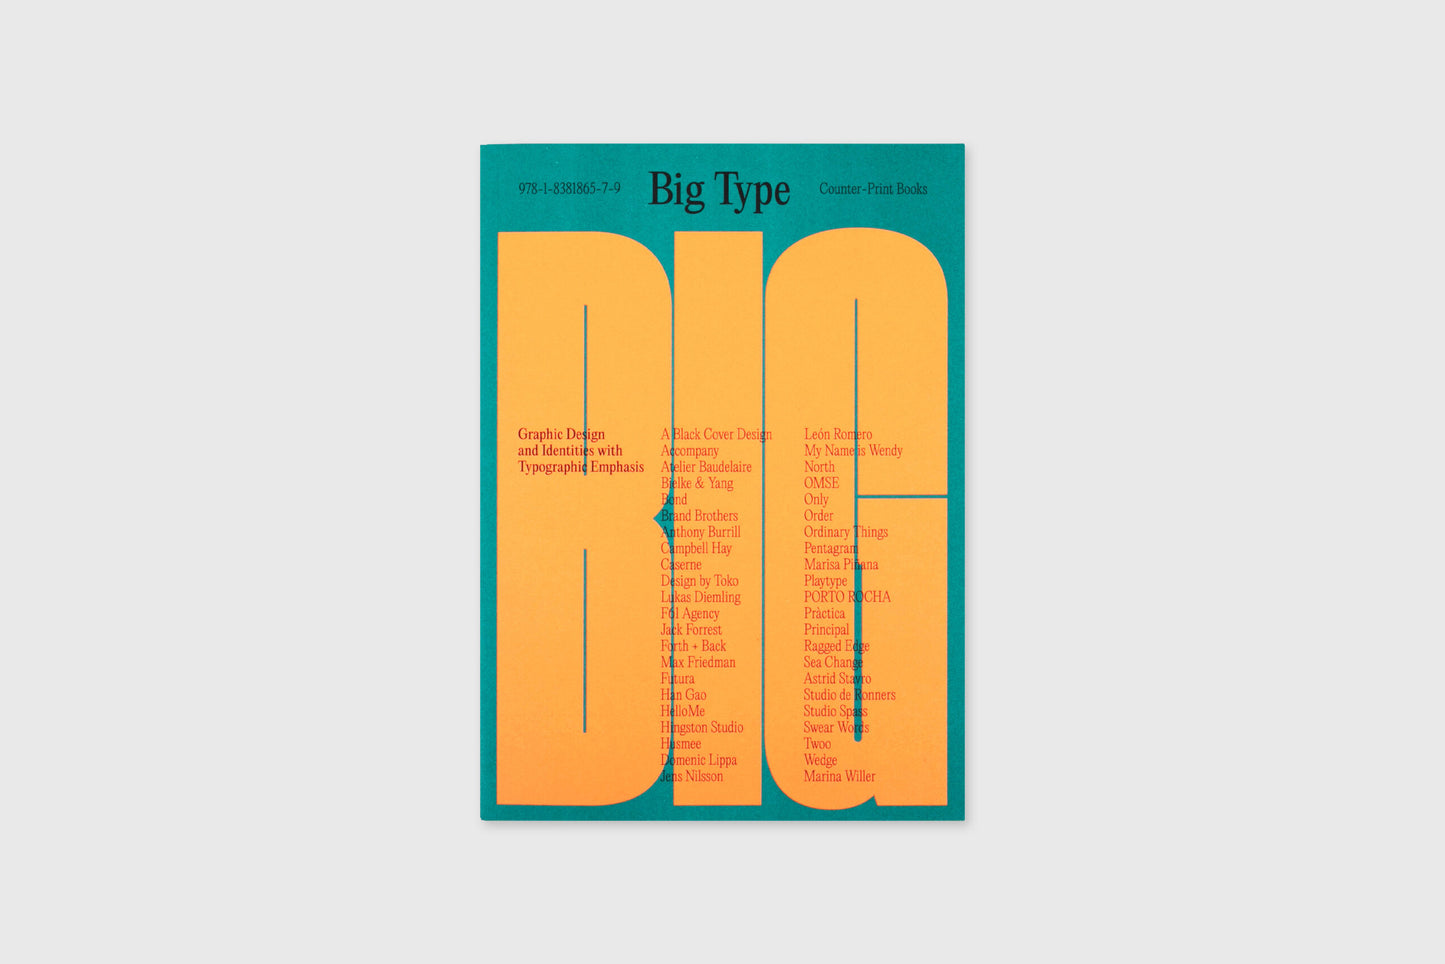 Big Type: Graphic Design and Identities with Typographic Emphasis